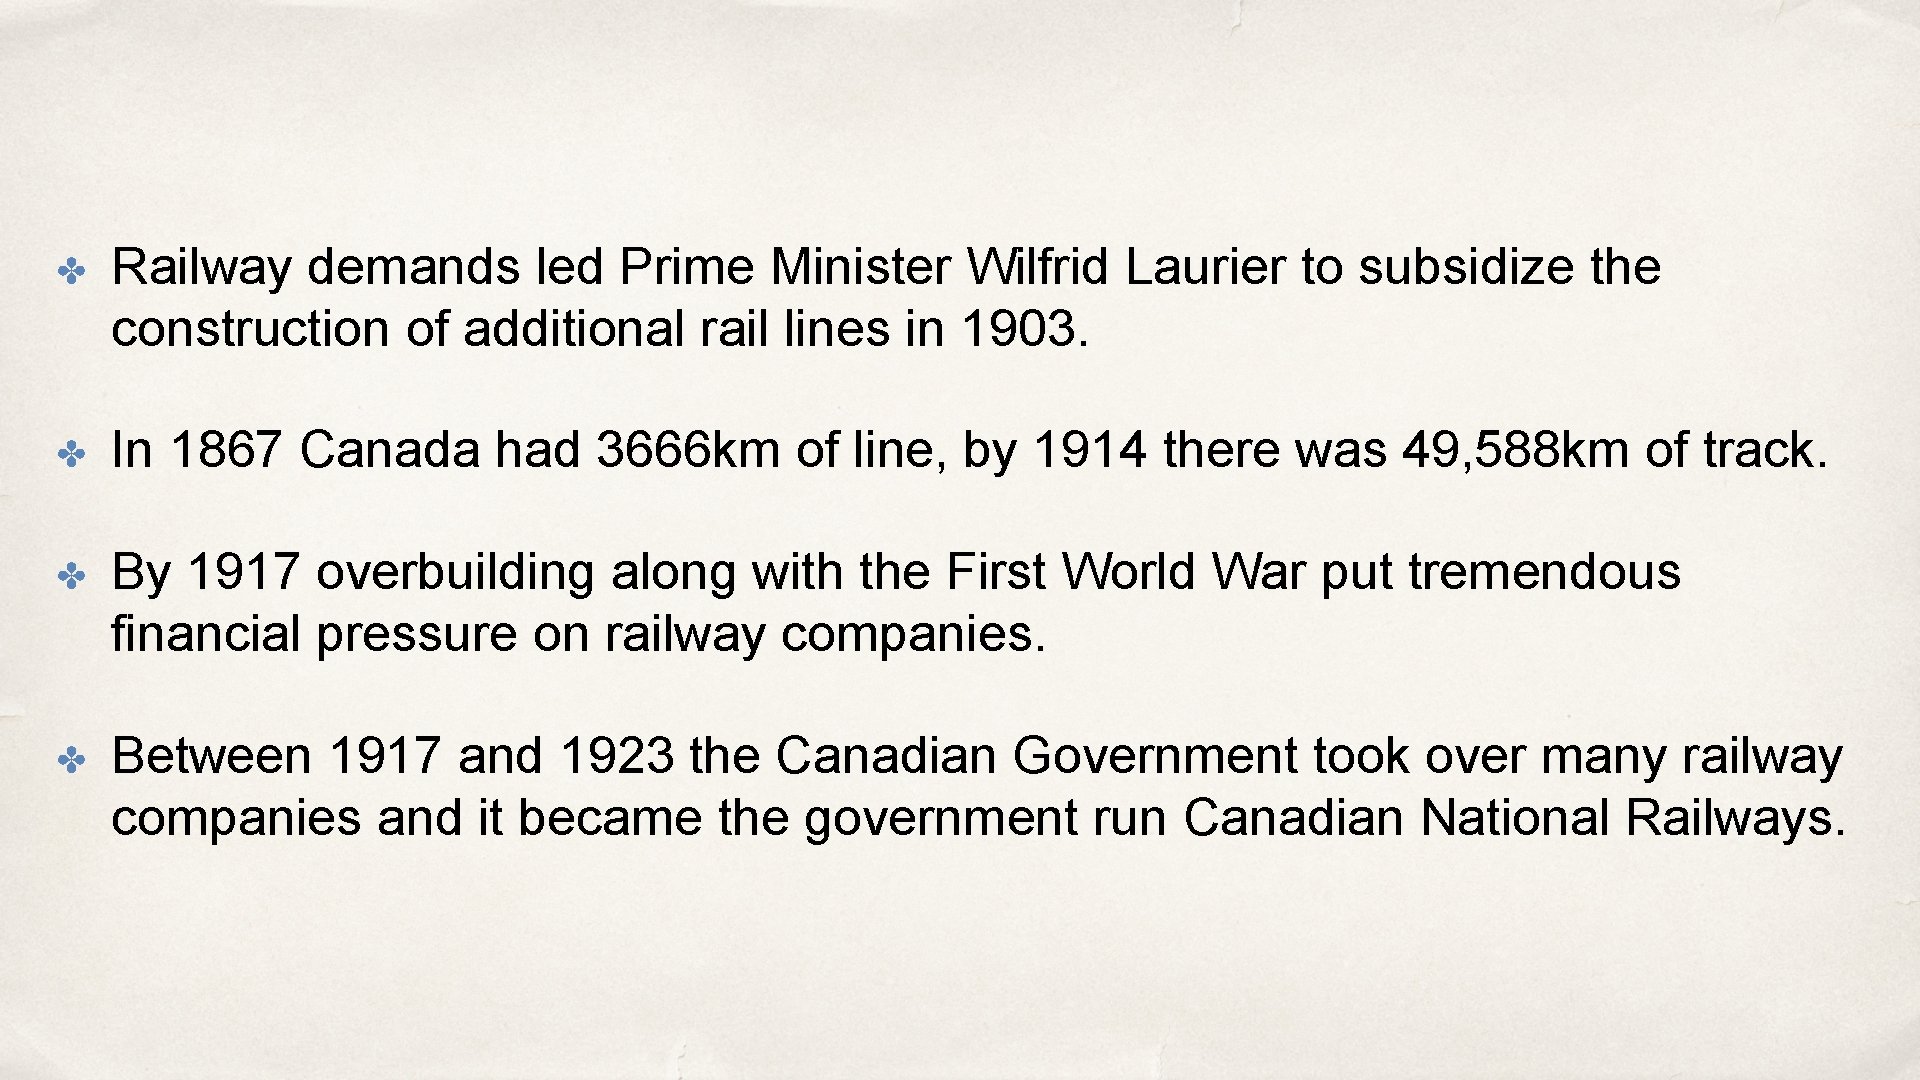 ✤ Railway demands led Prime Minister Wilfrid Laurier to subsidize the construction of additional